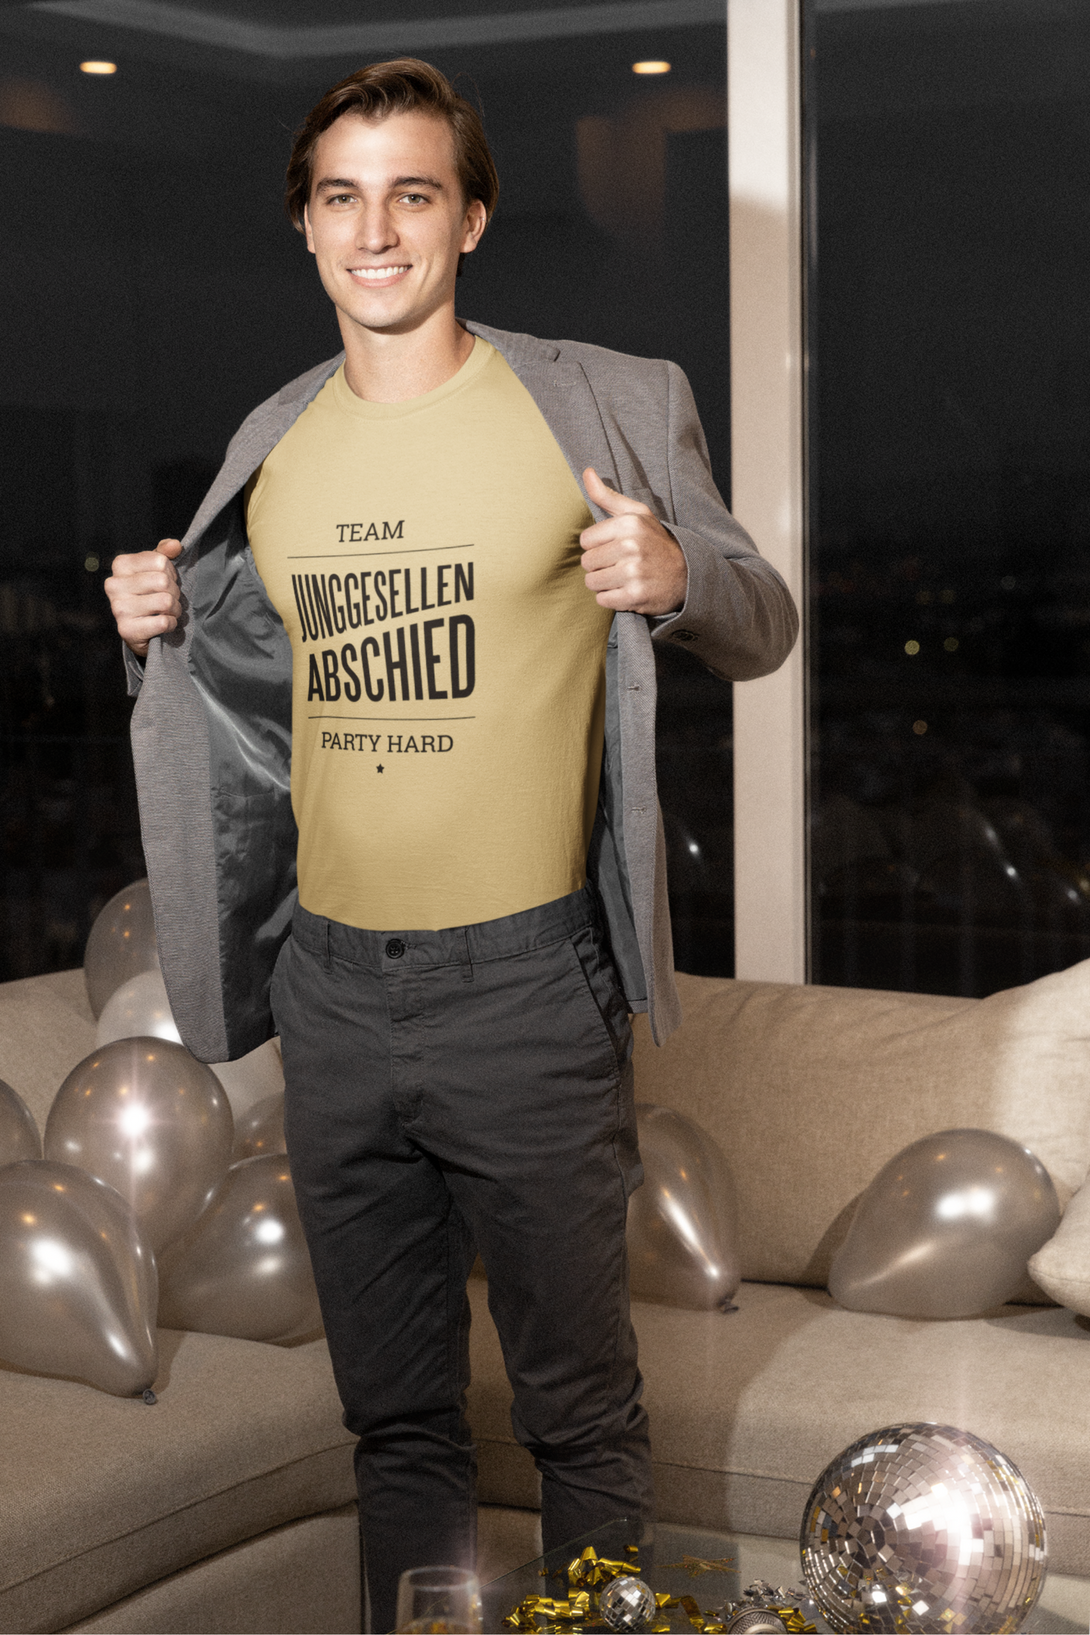 German Bachelor Party Printed T-Shirt For Men - WowWaves - 2